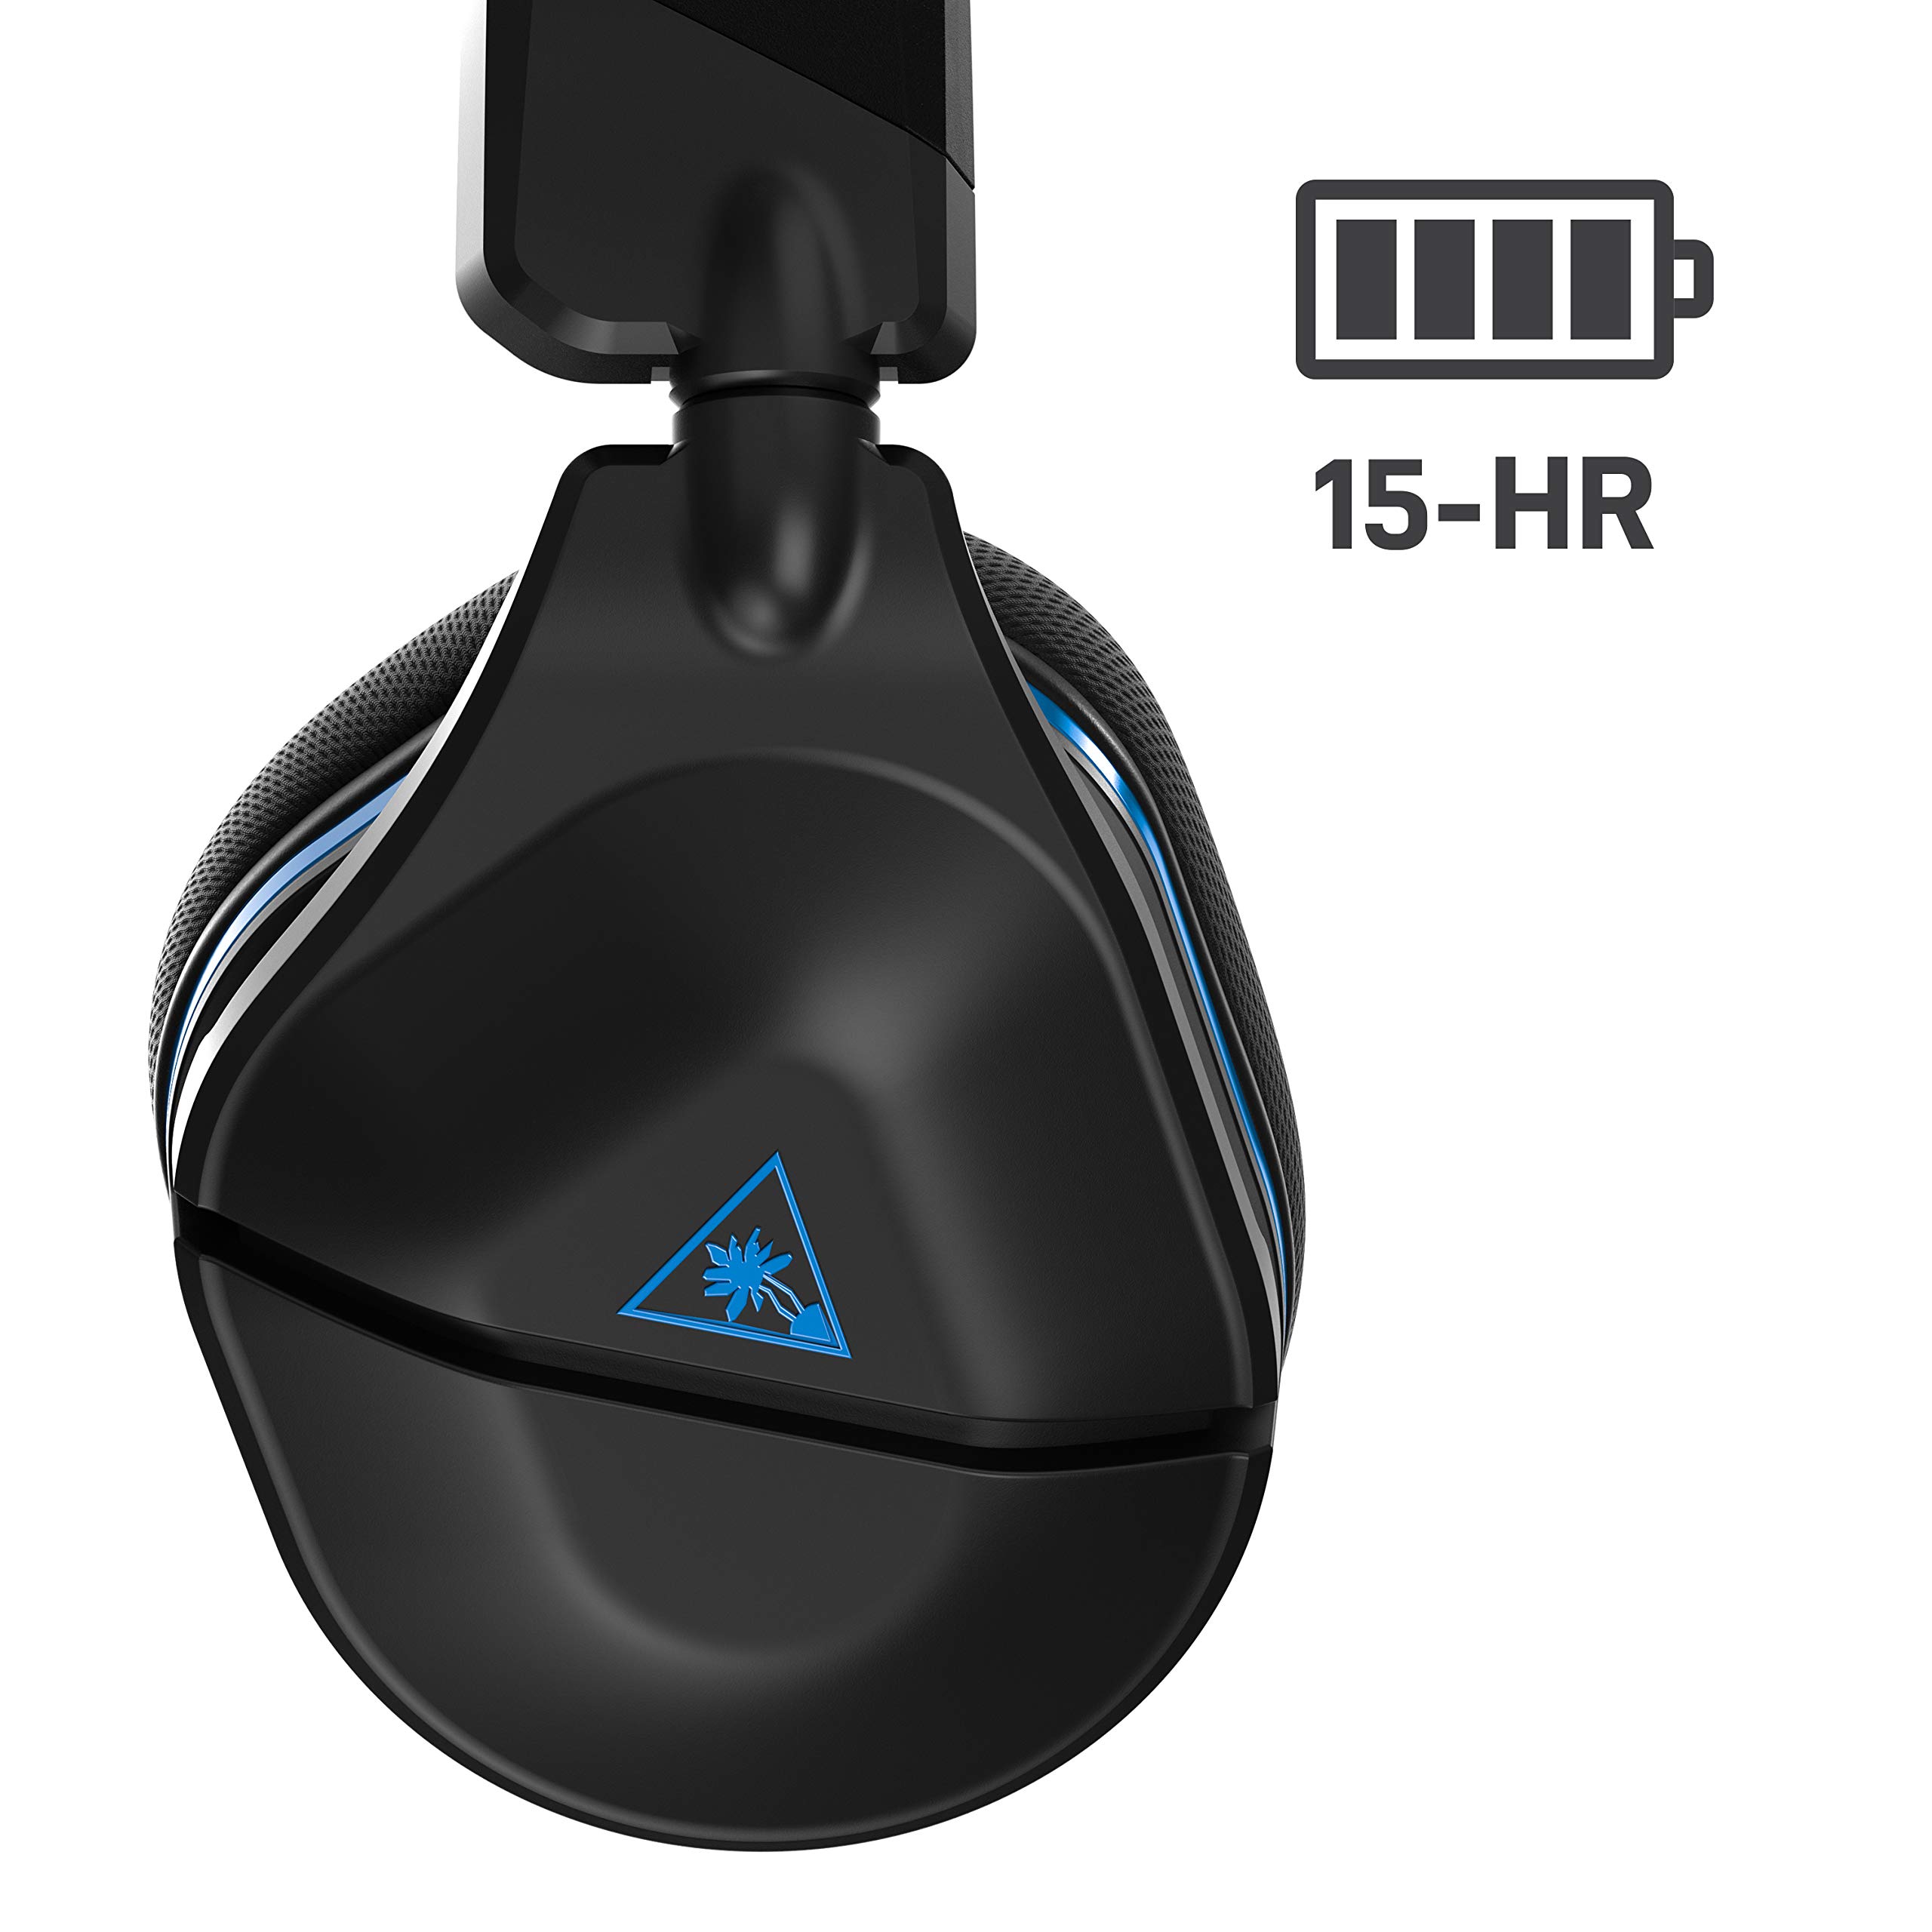 Turtle Beach Stealth 600 Gen 2 Wireless Gaming Headset for PS5, PS4, PS4 Pro, PlayStation, & Nintendo Switch with 50mm Speakers, 15-Hour Battery life, Flip-to-Mute Mic, and Spatial Audio - Black